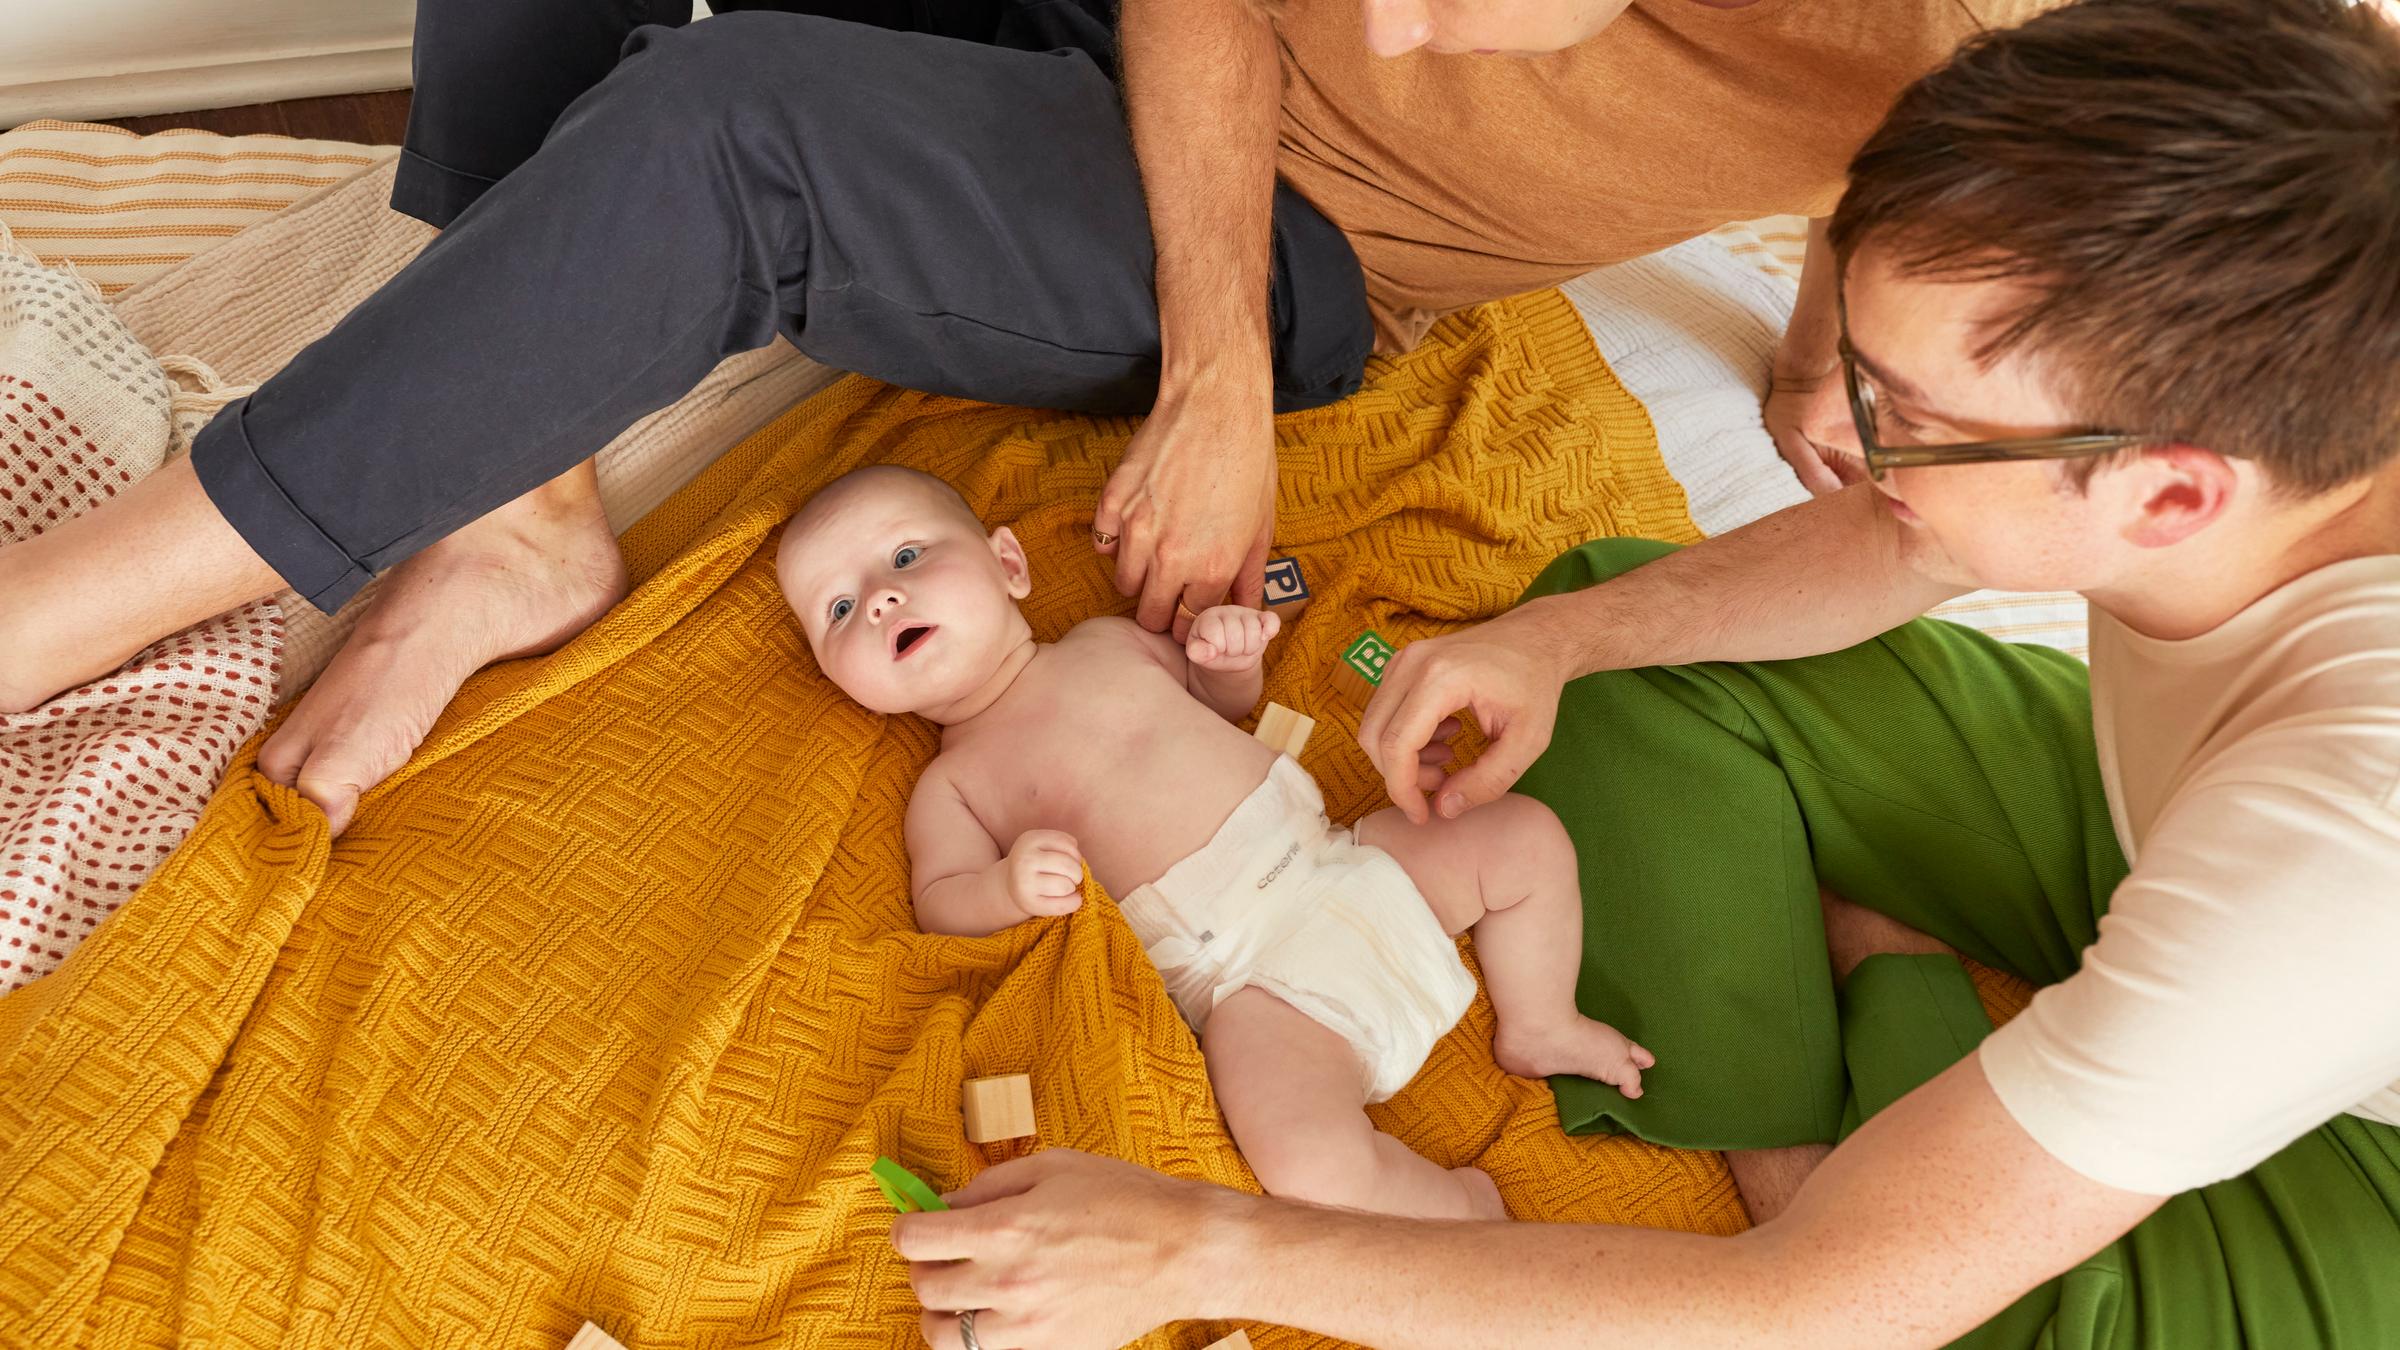 Two dads are playing with their child who is laying on a yellow blanket.